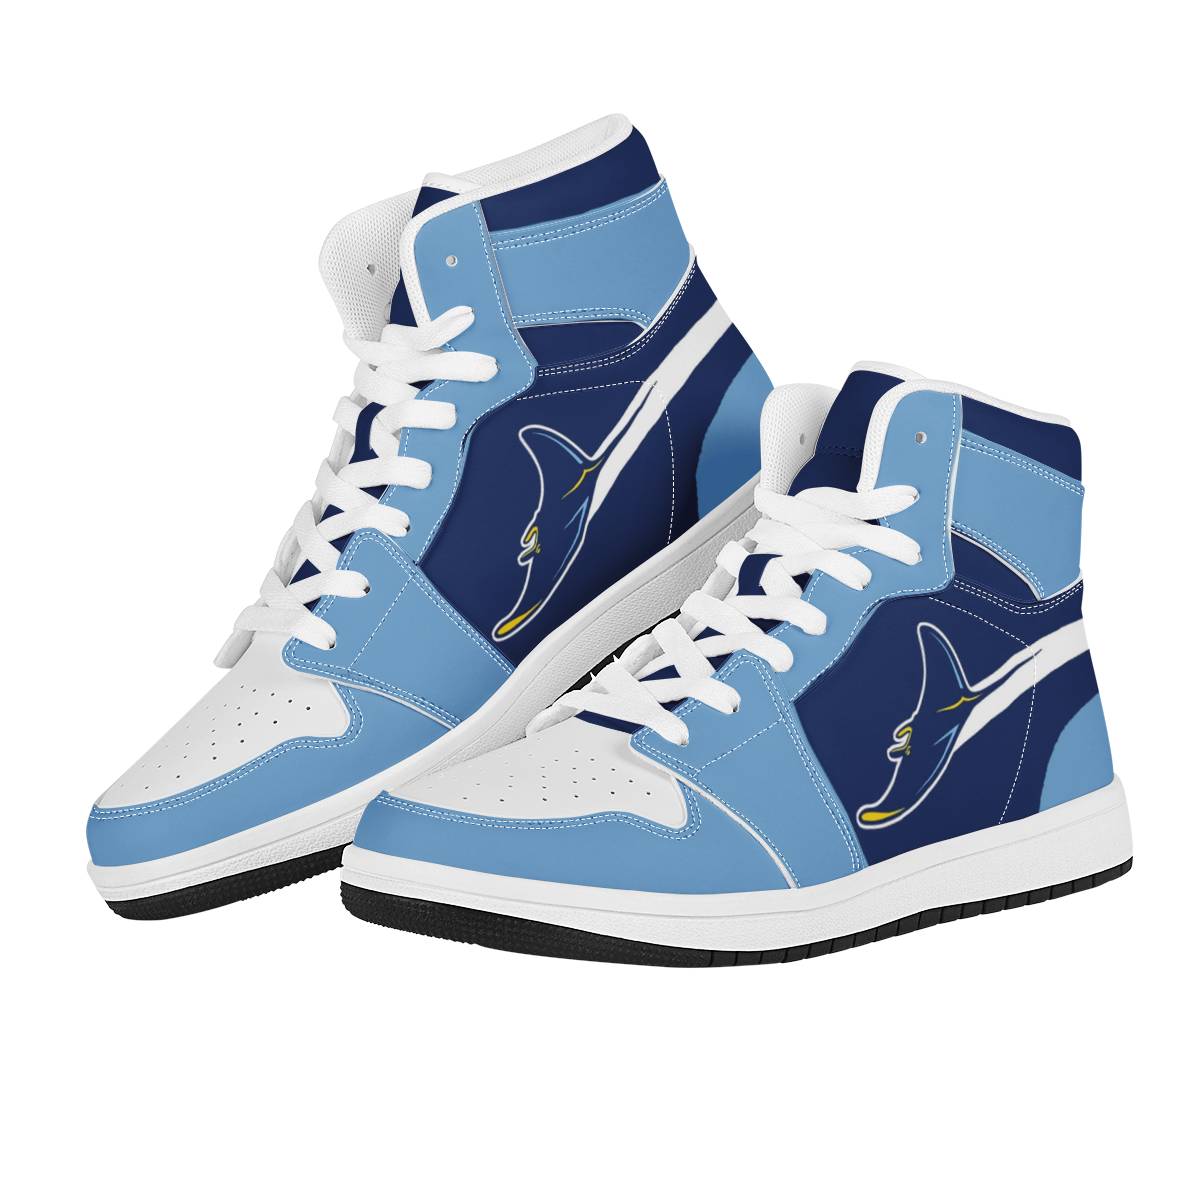 Women's Tampa Bay Rays High Top Leather AJ1 Sneakers 001